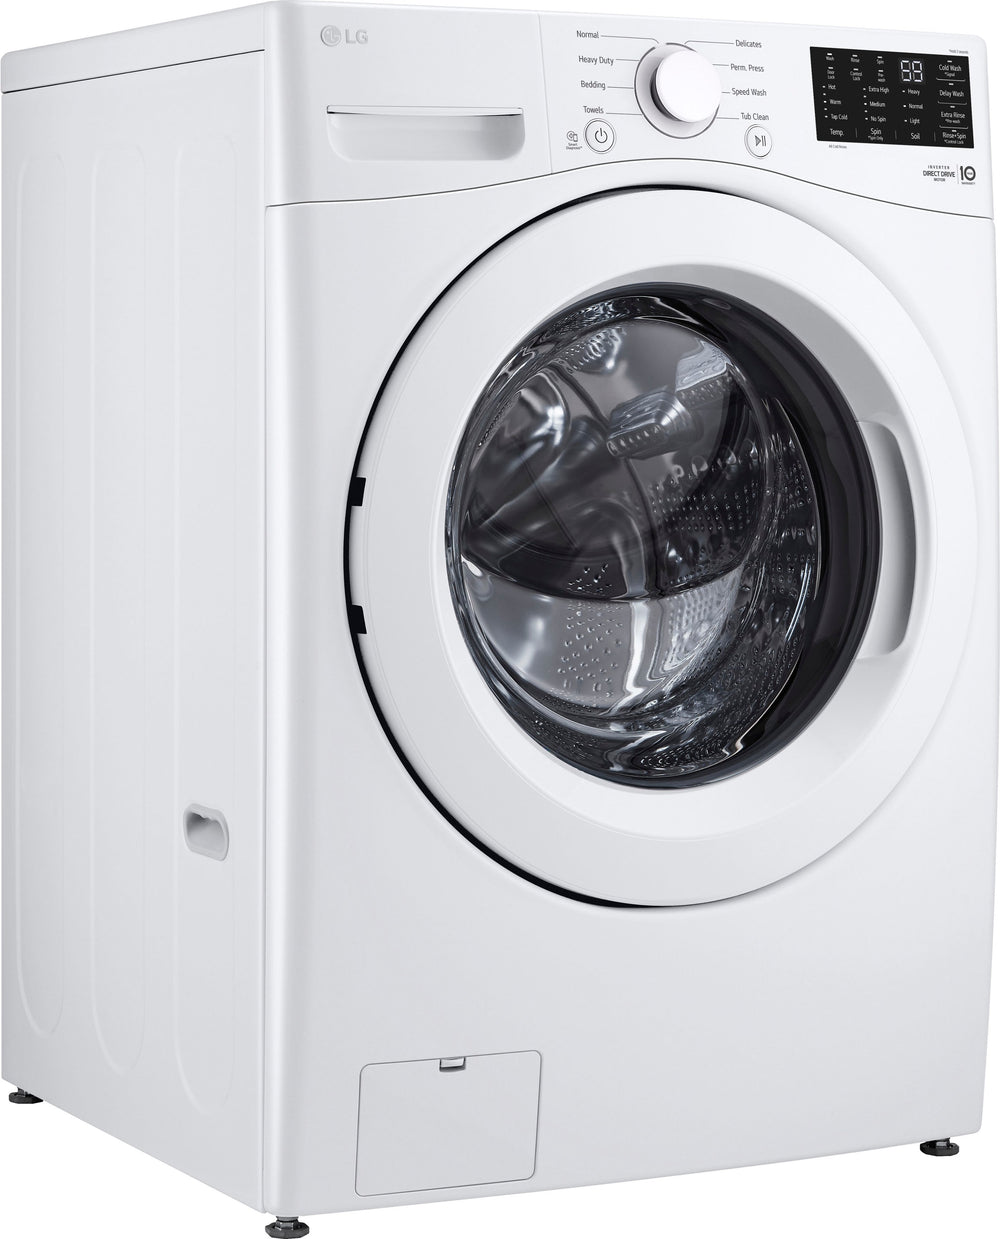 LG - 5.0 Cu. Ft. High-Efficiency Smart Front Load Washer with 6Motion Technology - White_1